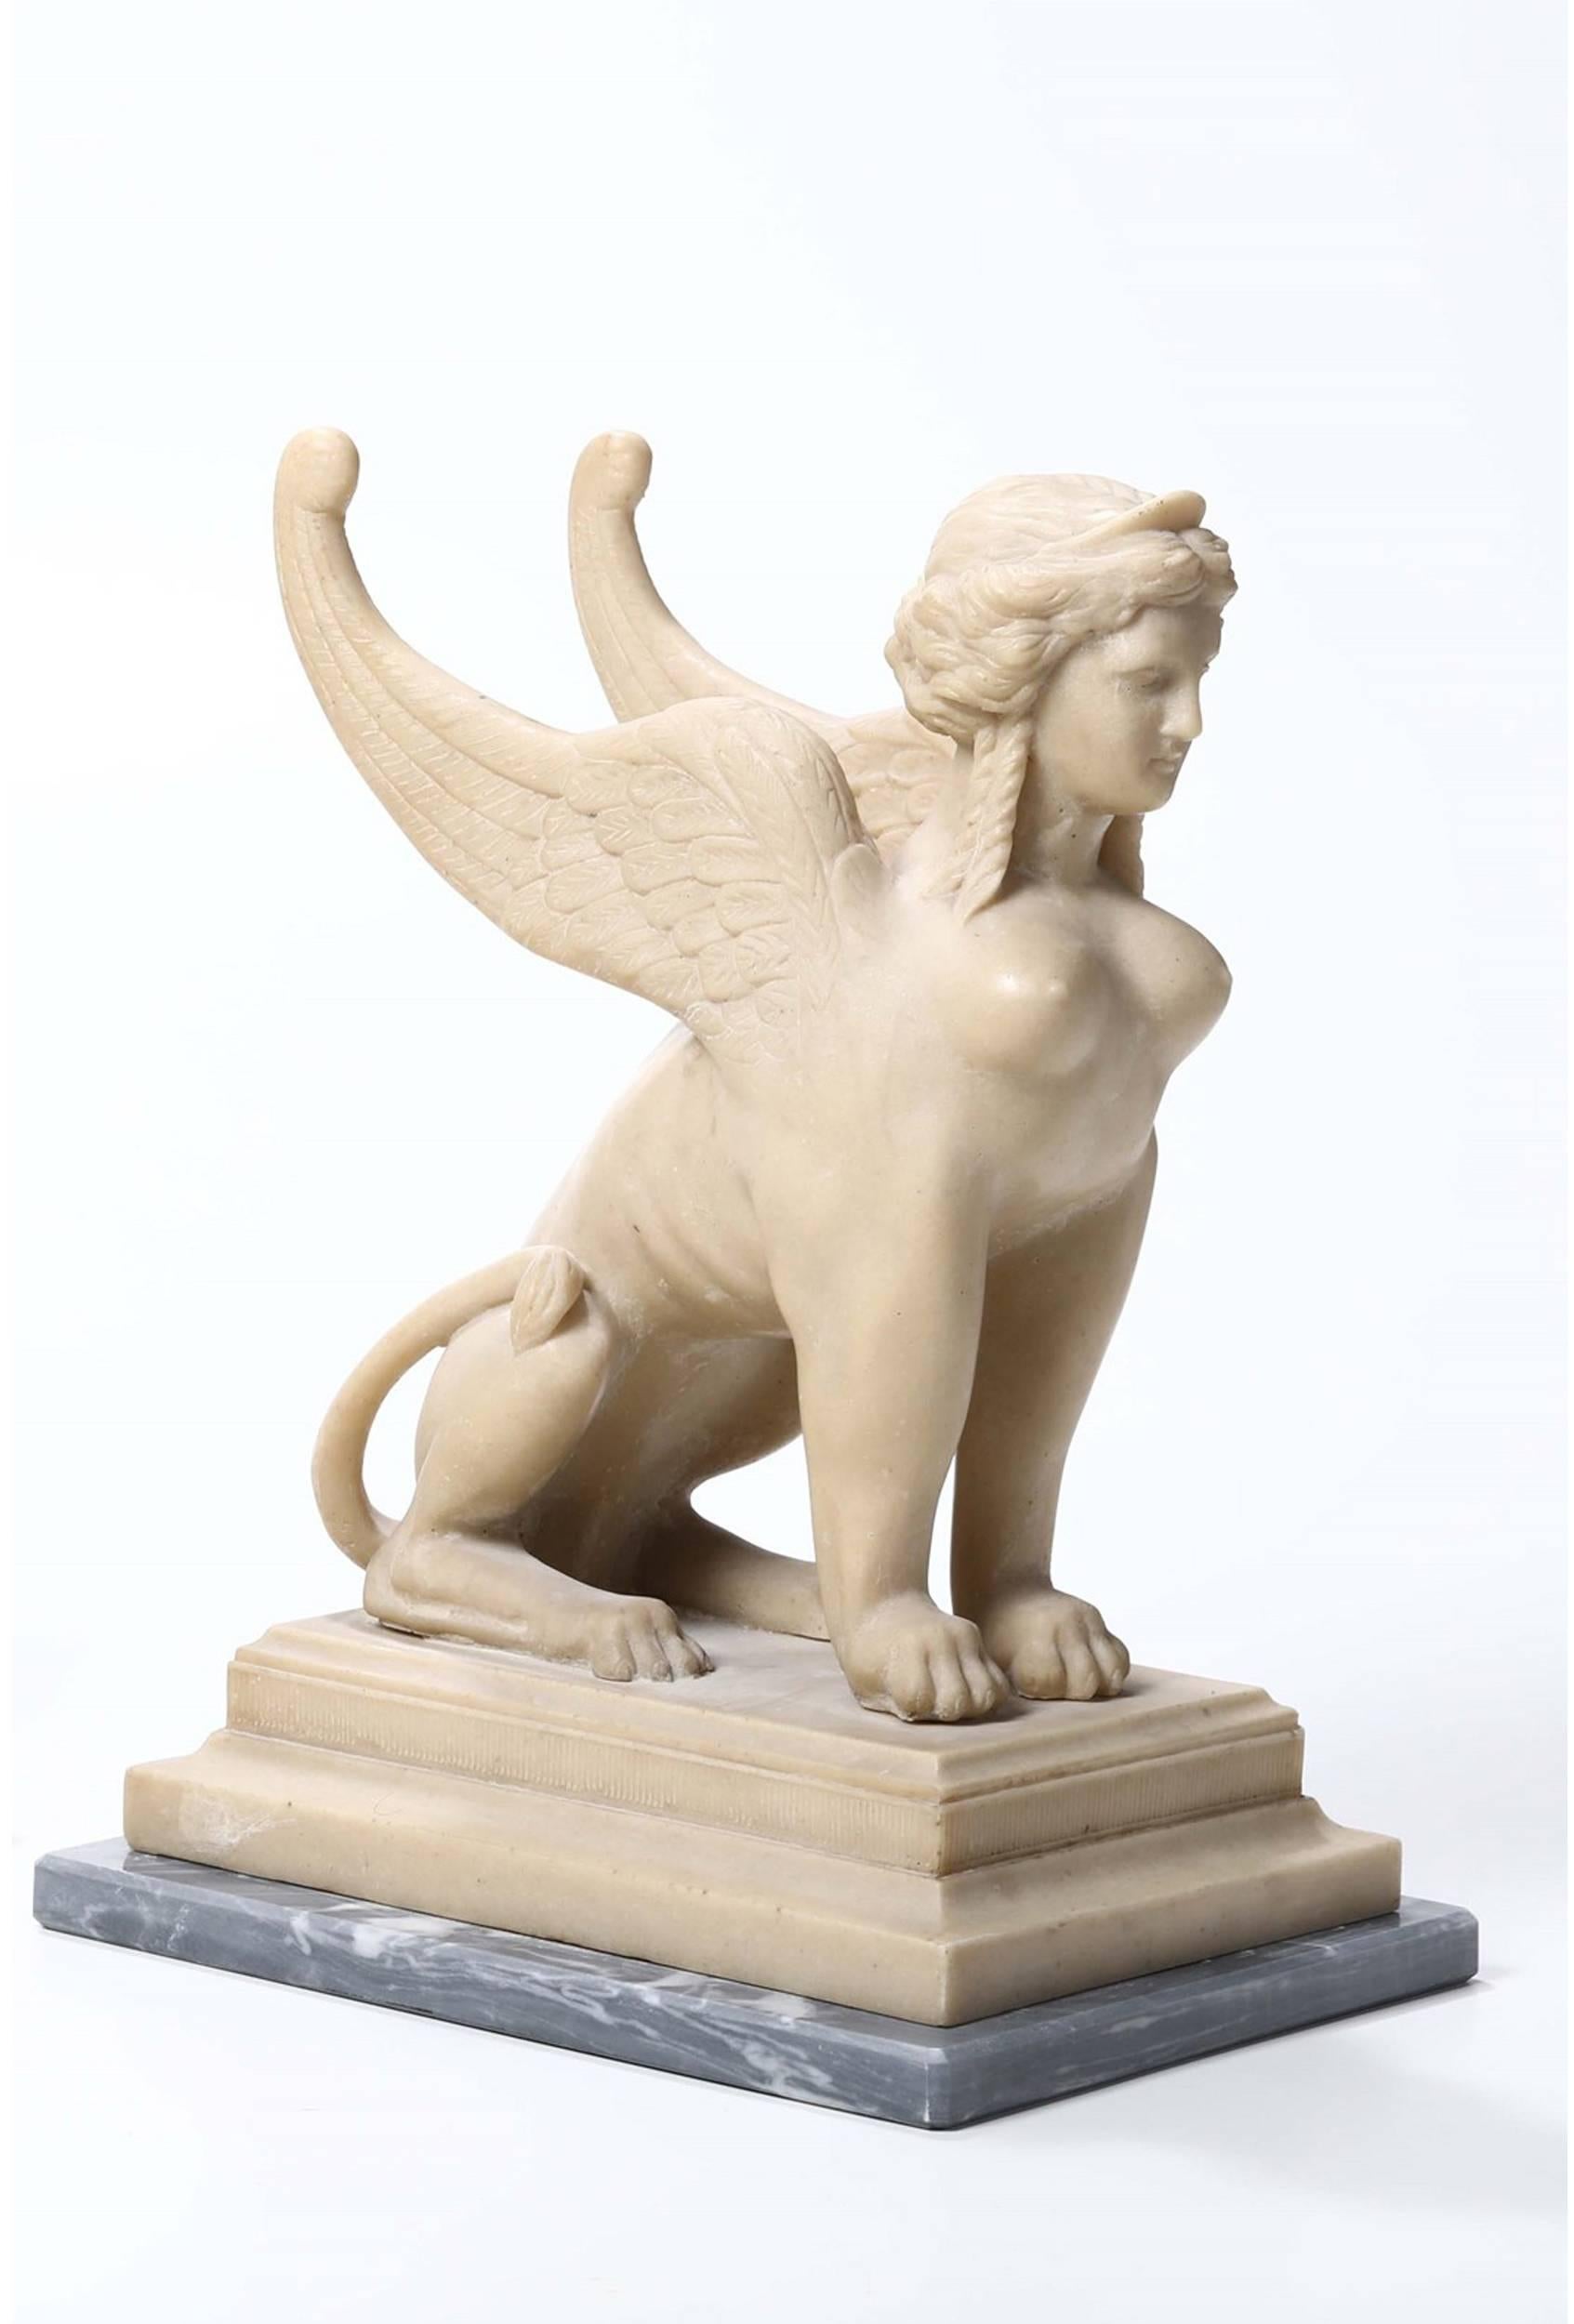 A sphinx is a mythical creature with the head of a human and the body of animal. In Greek tradition, it has the head of a human, the haunches of a lion, and like in this pair of sculpture the wings of a bird. It is mythicized as treacherous and